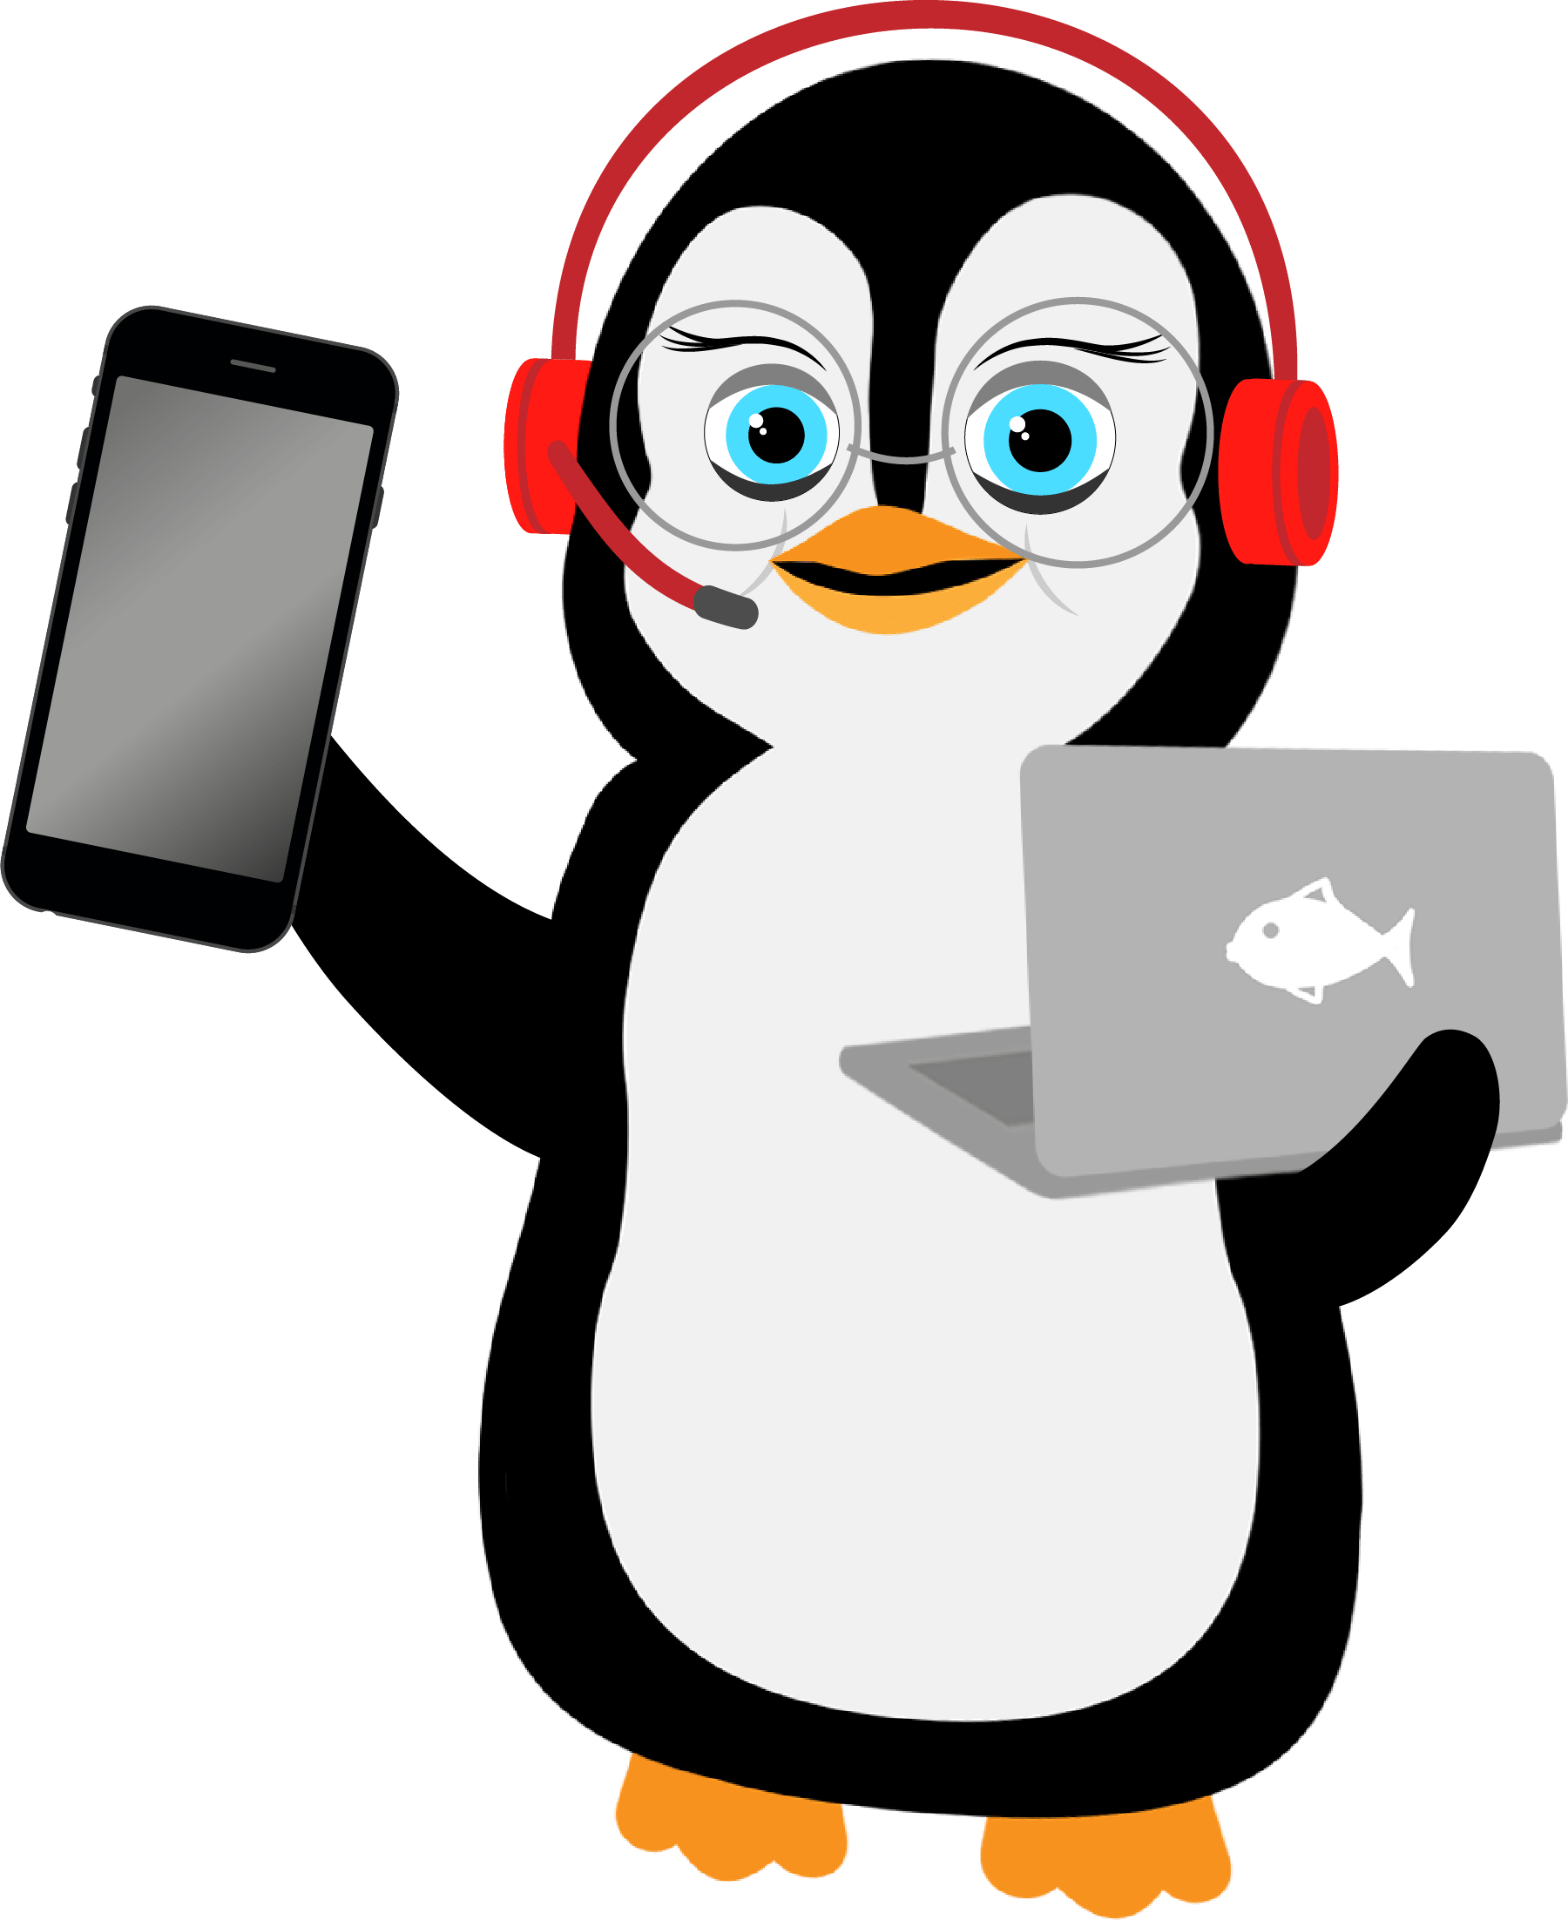 A penguin with a smart phone, laptop and headset